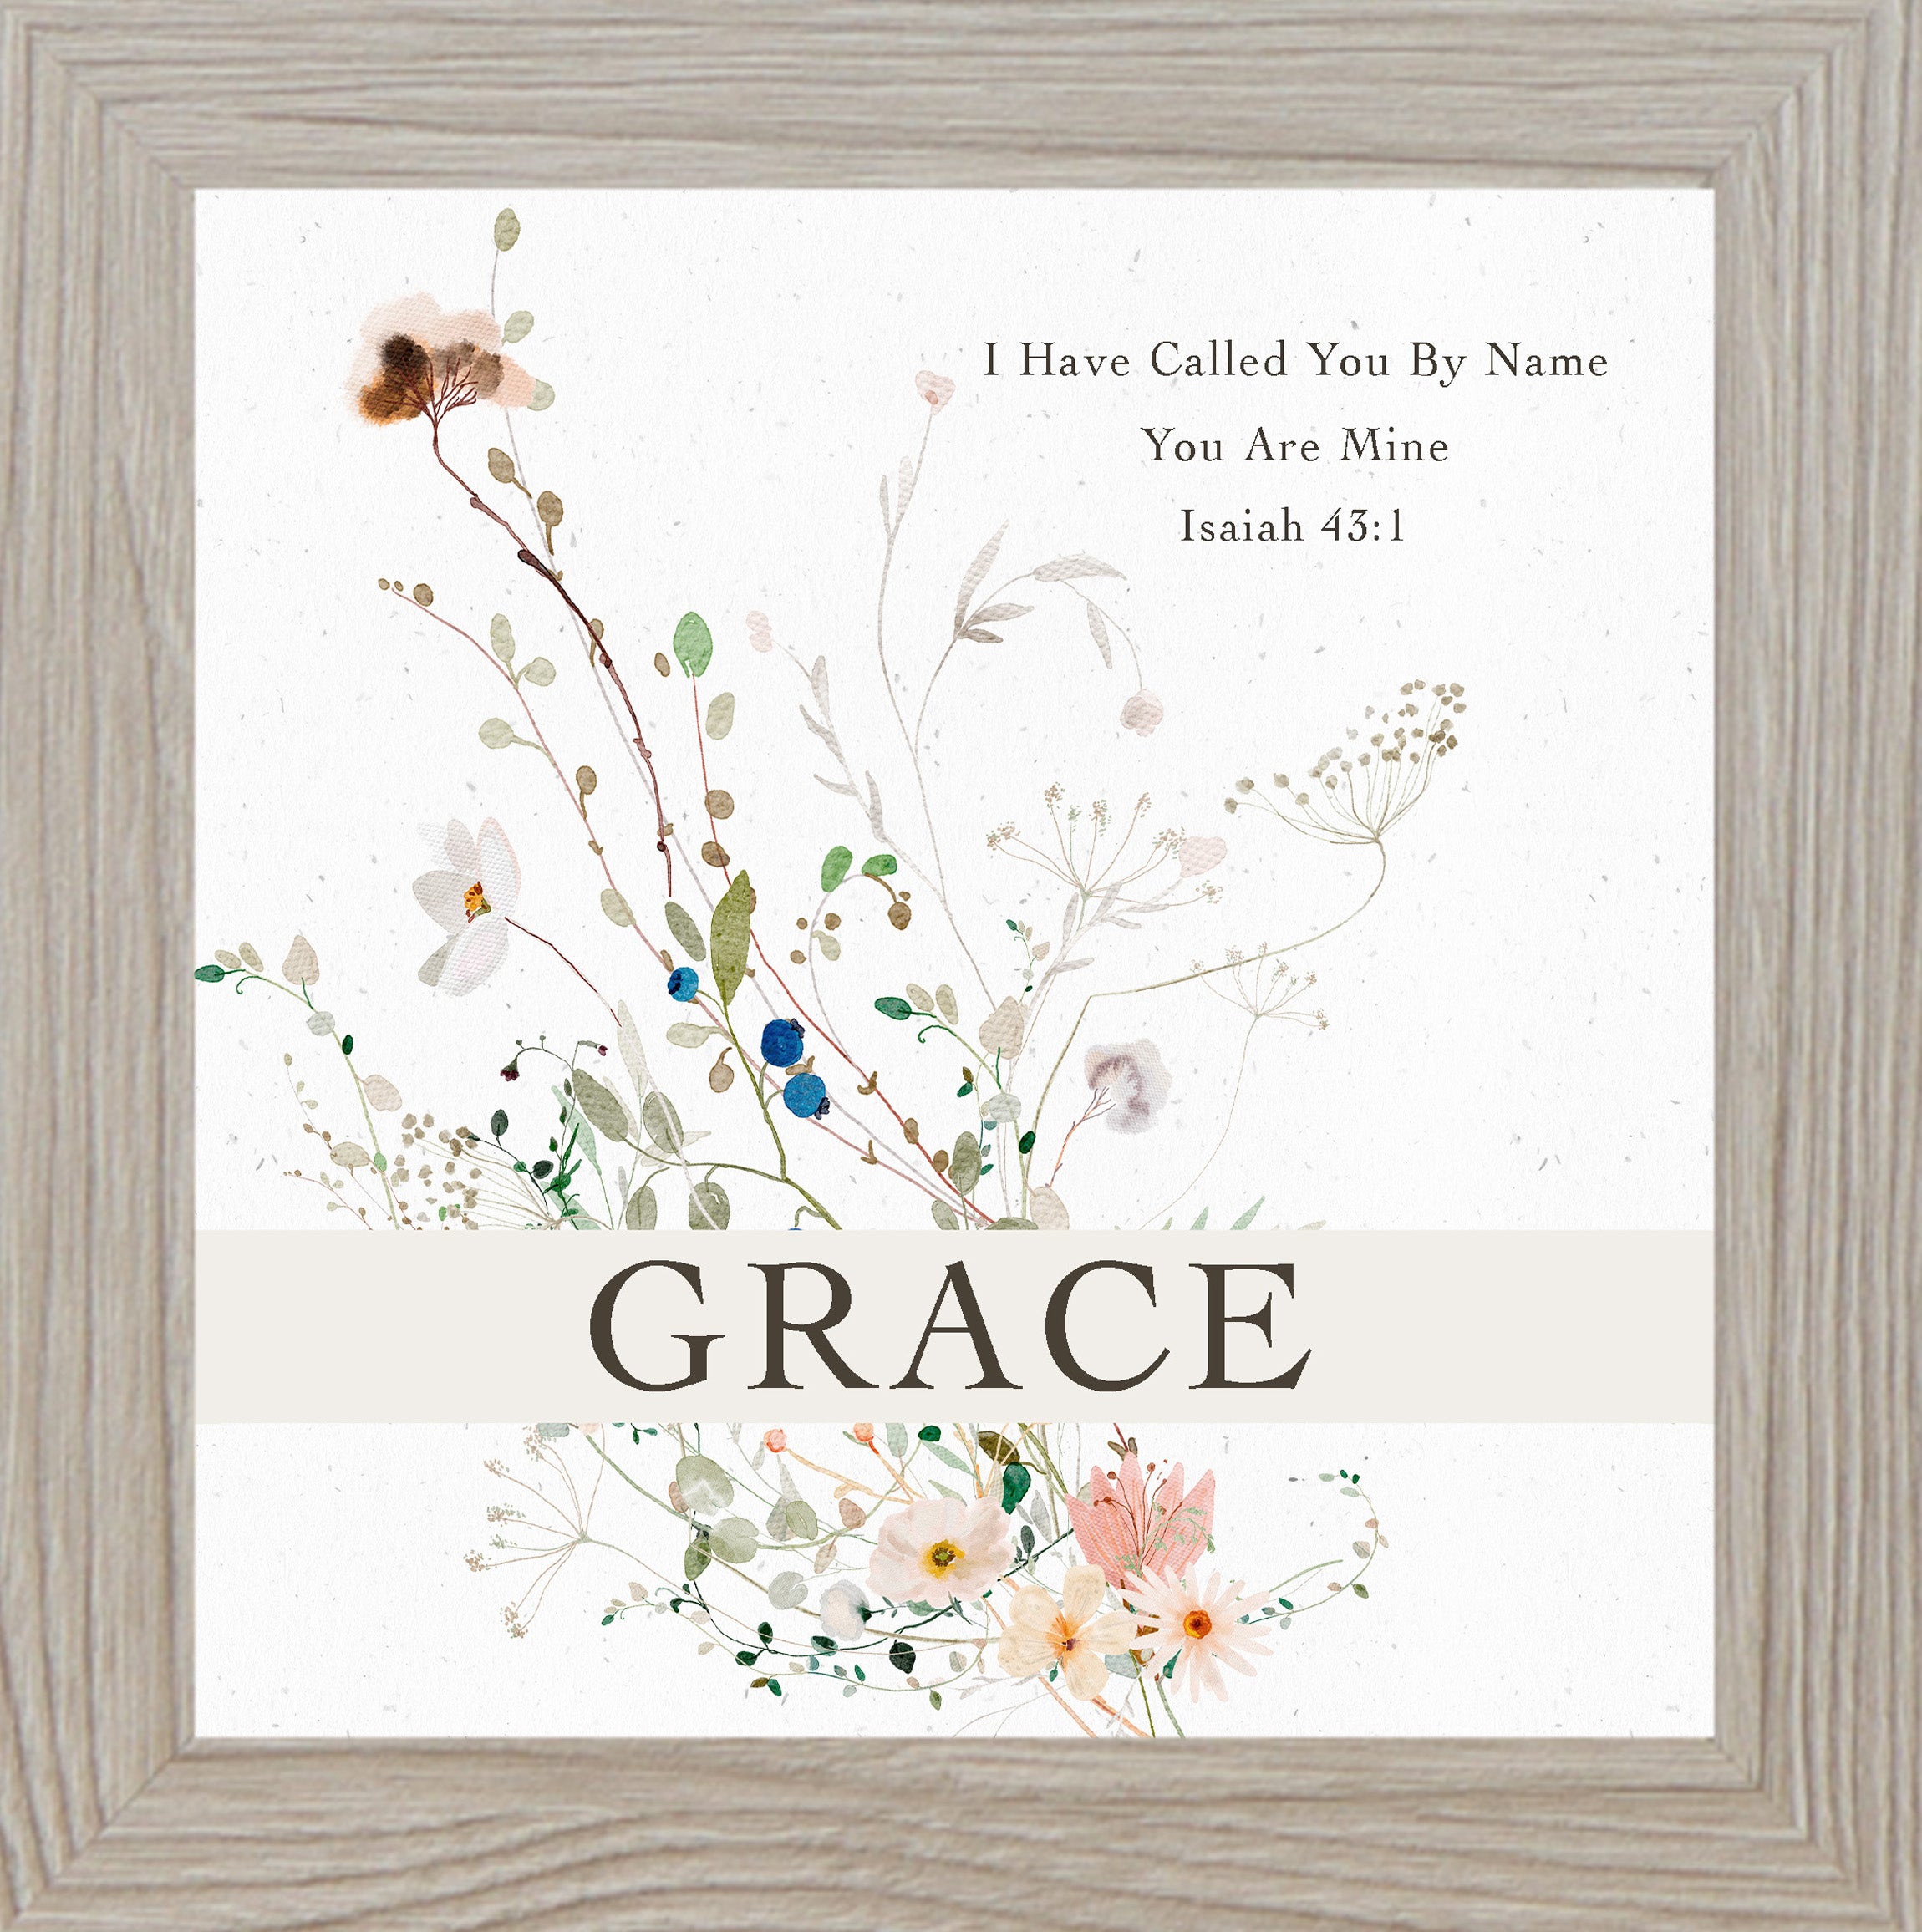 Personalized I Have Called You by Name by Summer Snow PER179